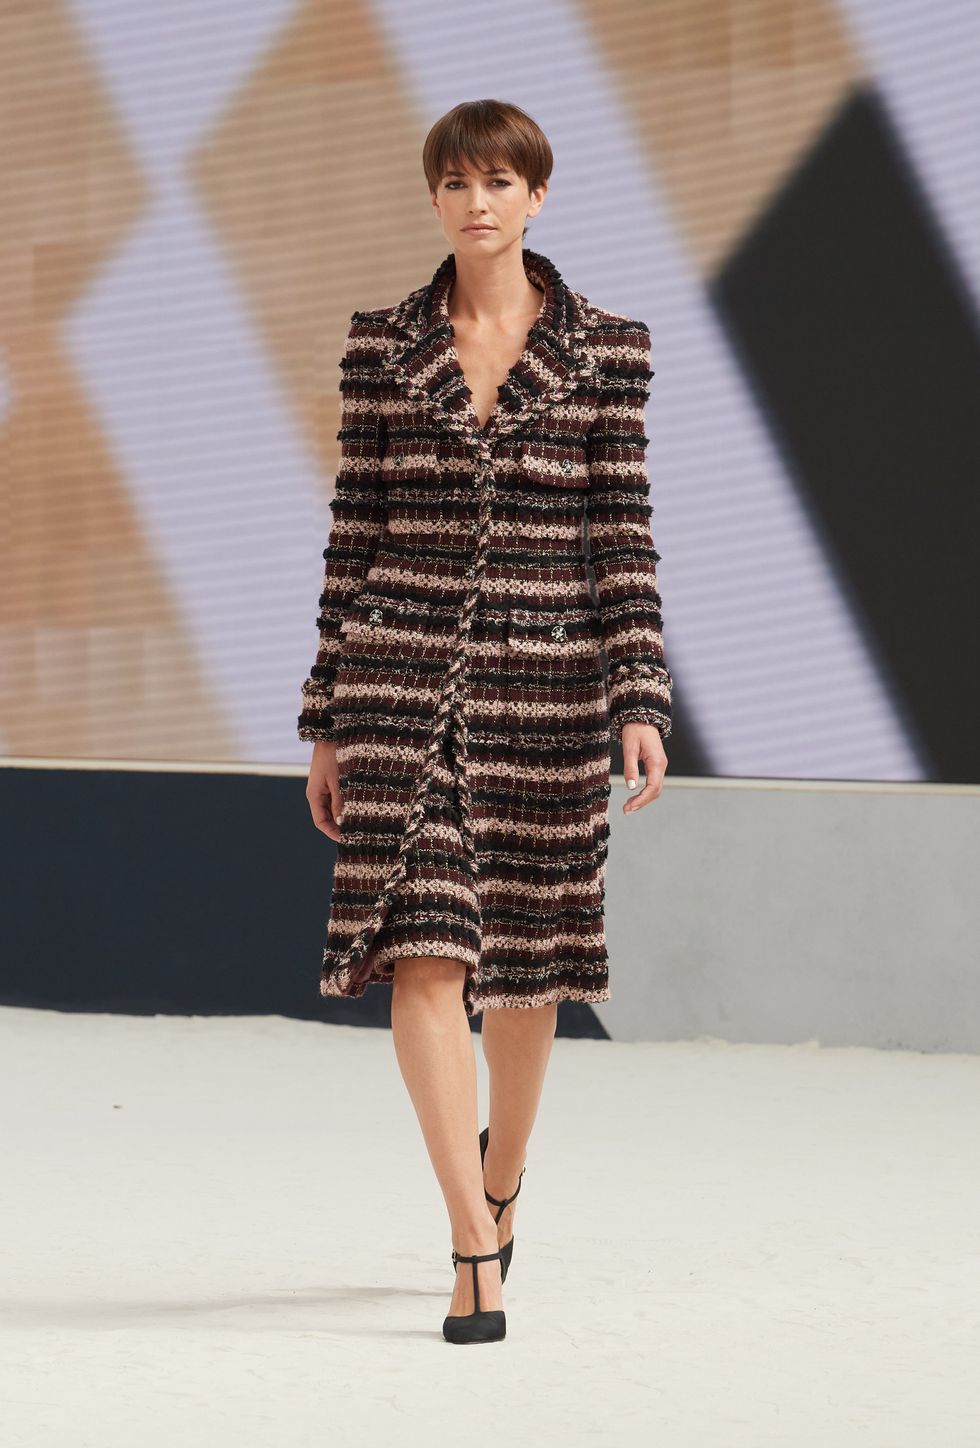 Chanel Fall-Winter 2022/23: Classic yet contemporary couture done right